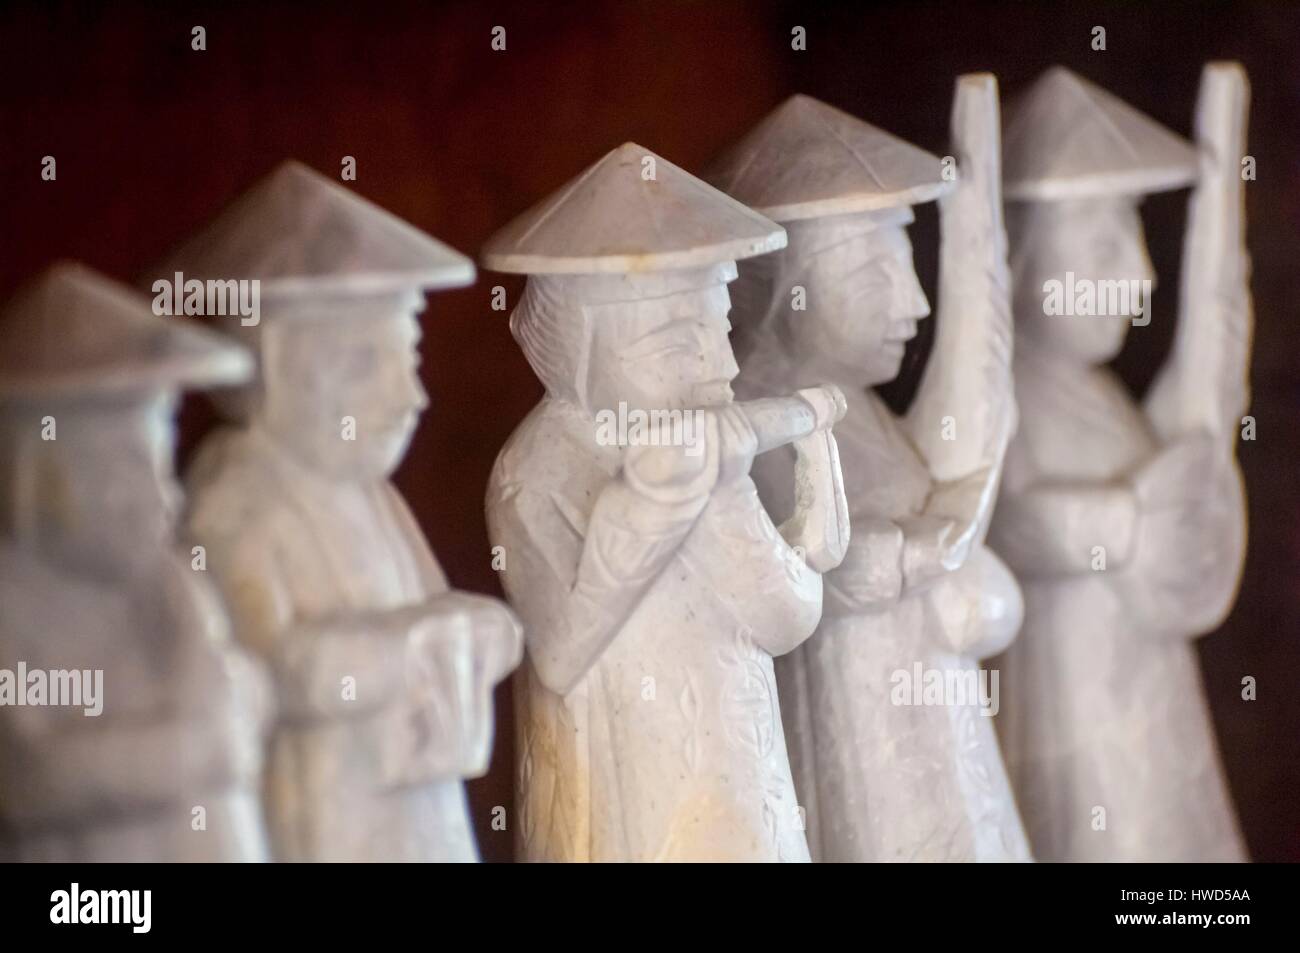 Vietnam, High Tonkin, province of Lao Cai, Sa Pa town, traditional musicians statuettes of a sculptor craftsman in his workshop Stock Photo